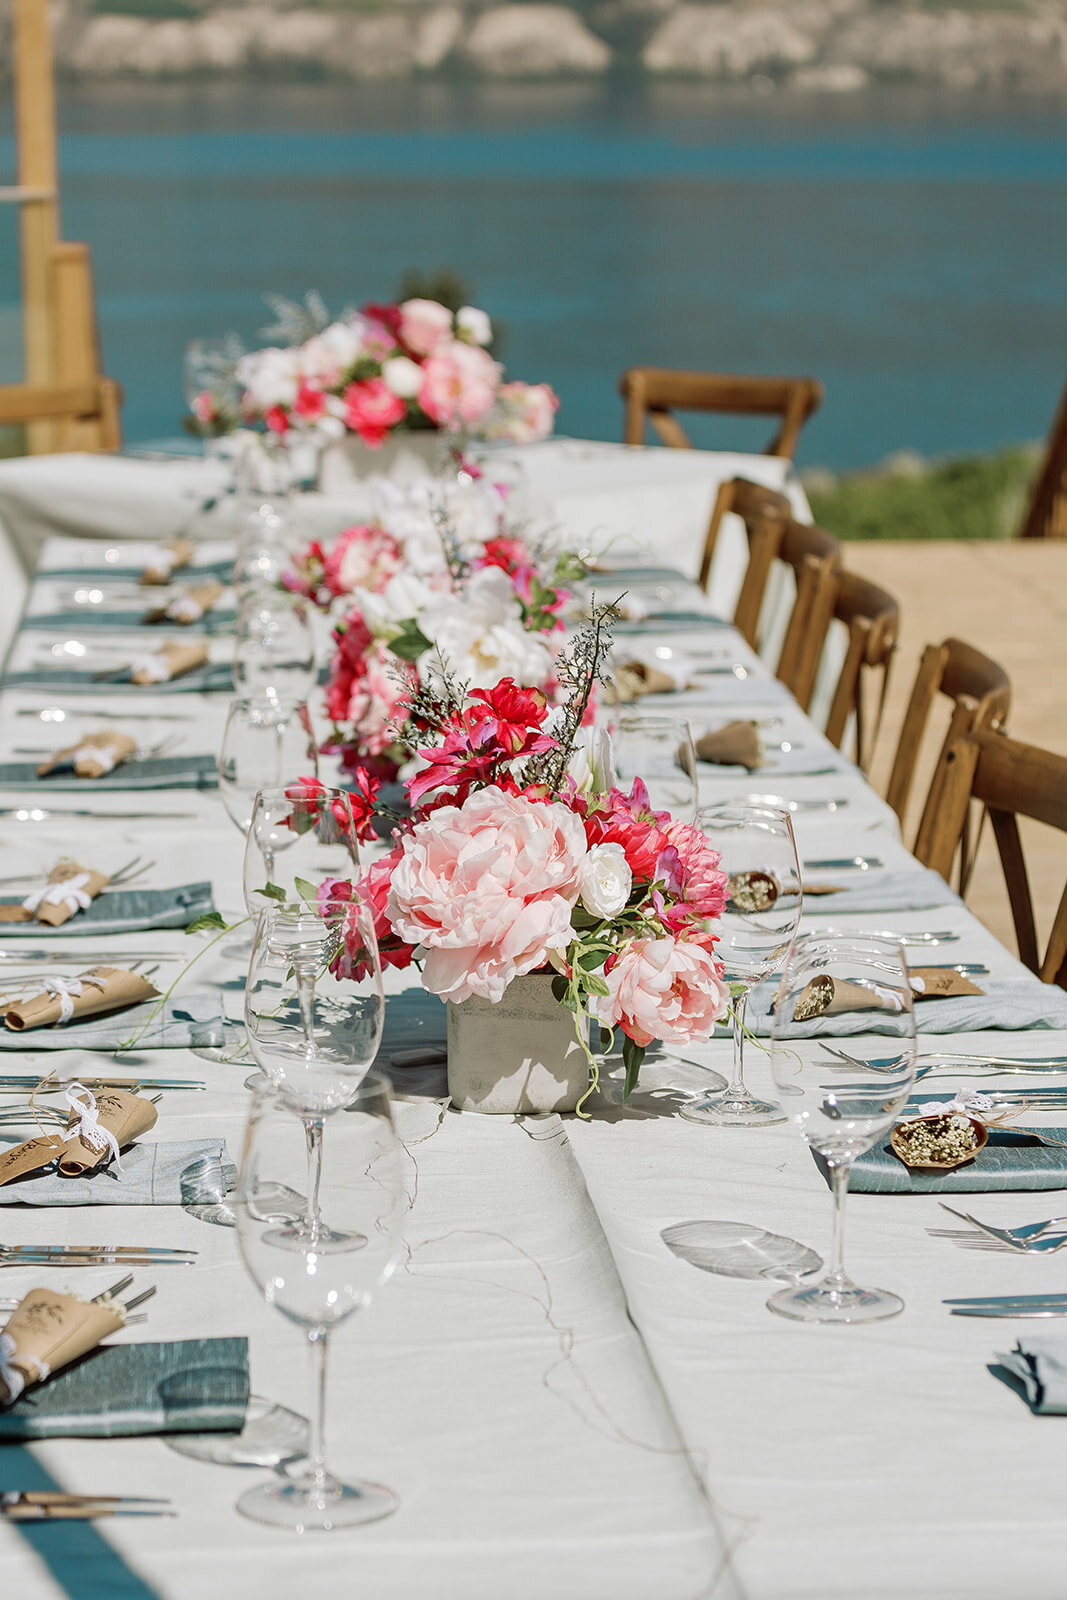 Pink wedding flowers on a blue tablecloth.